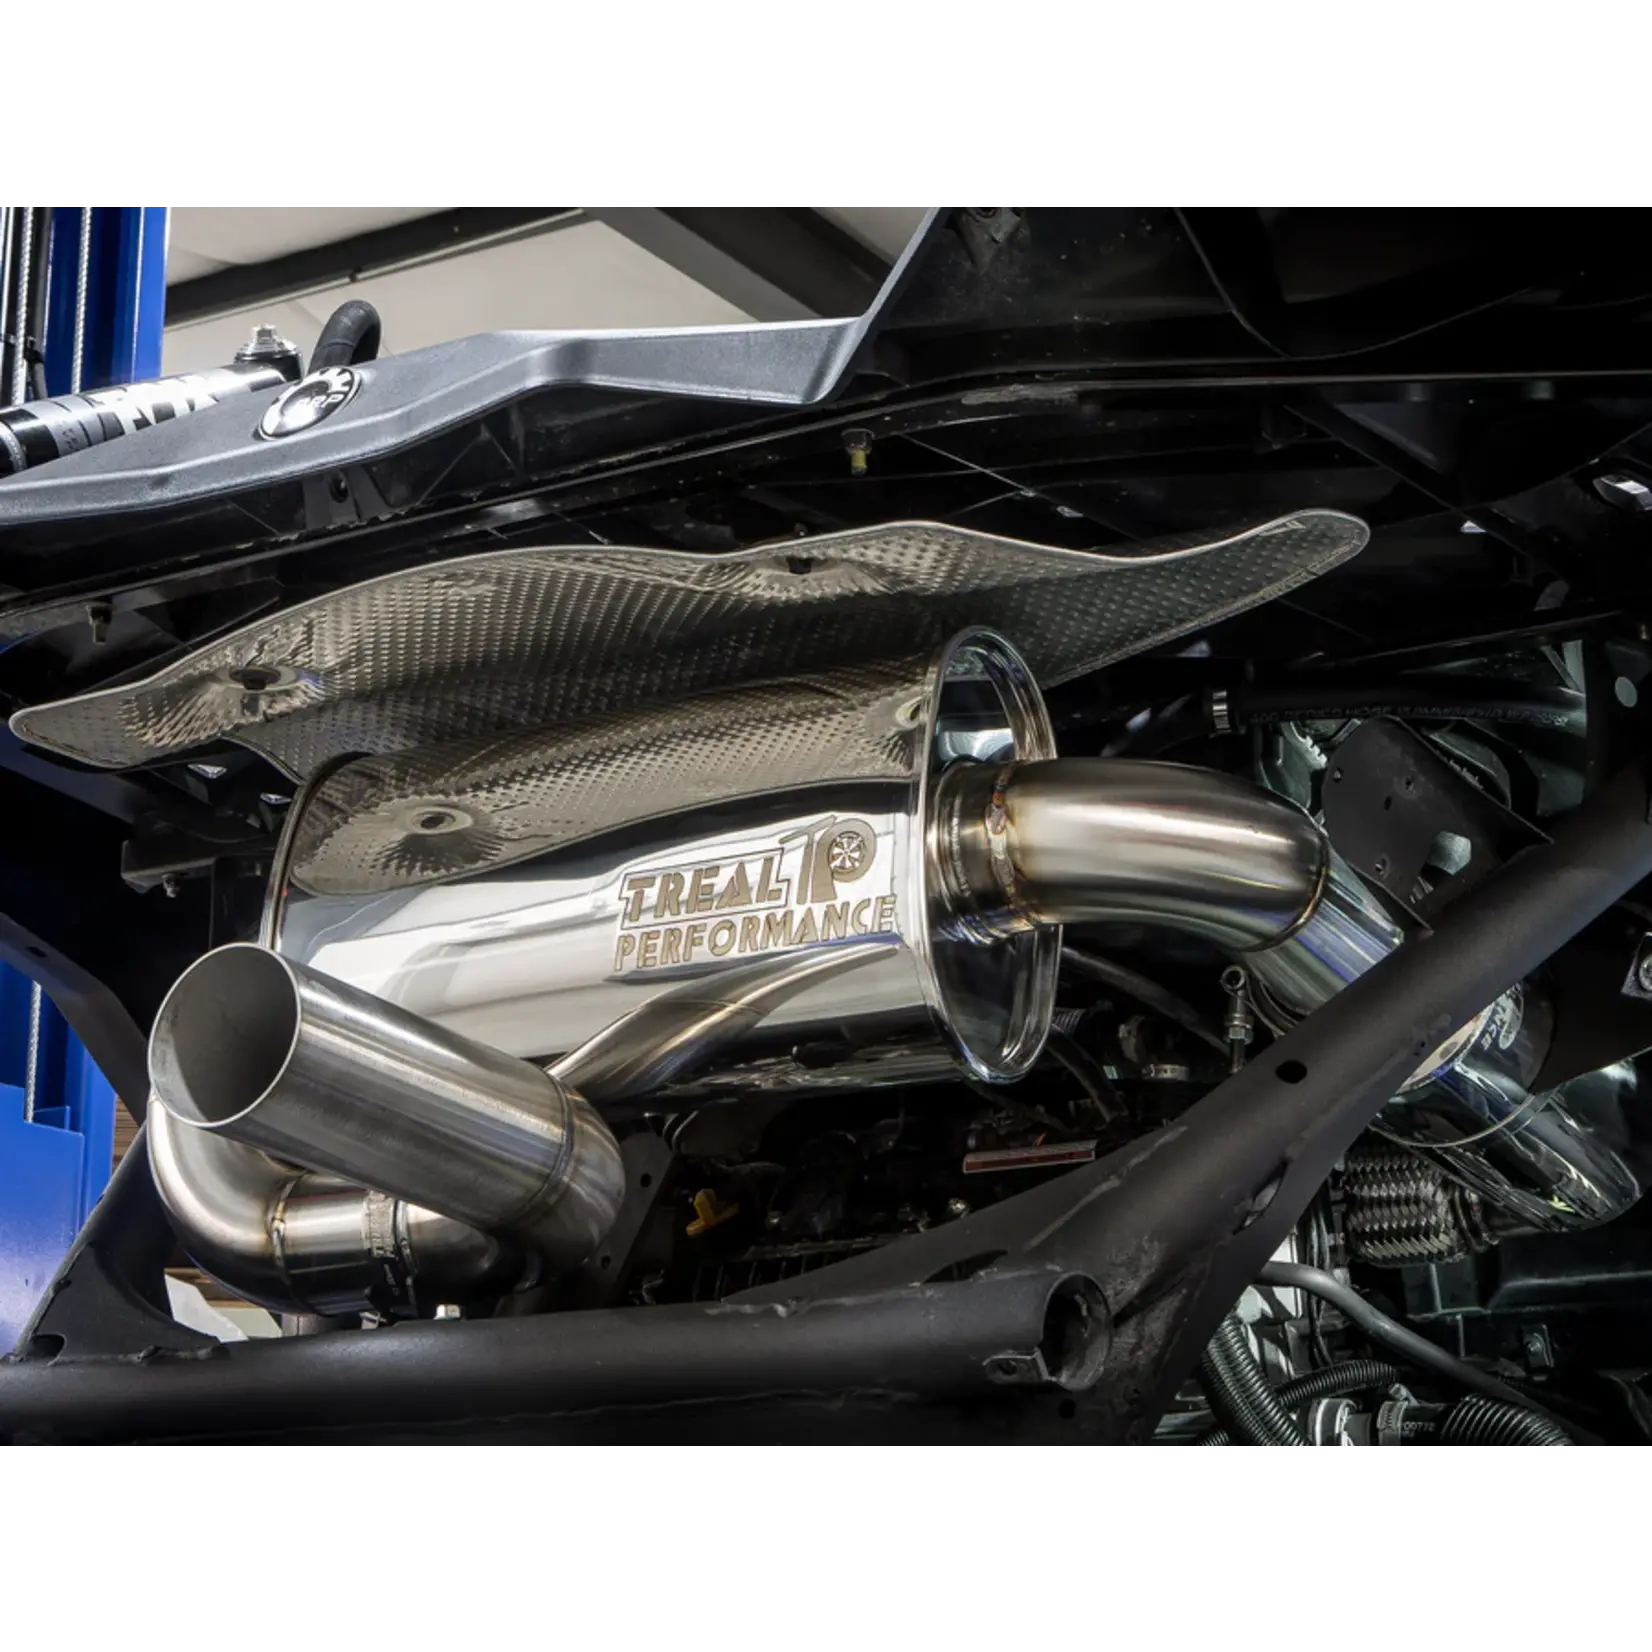 Treal Performance Treal Performance X3 17-19 Quiet Trail Exhaust System